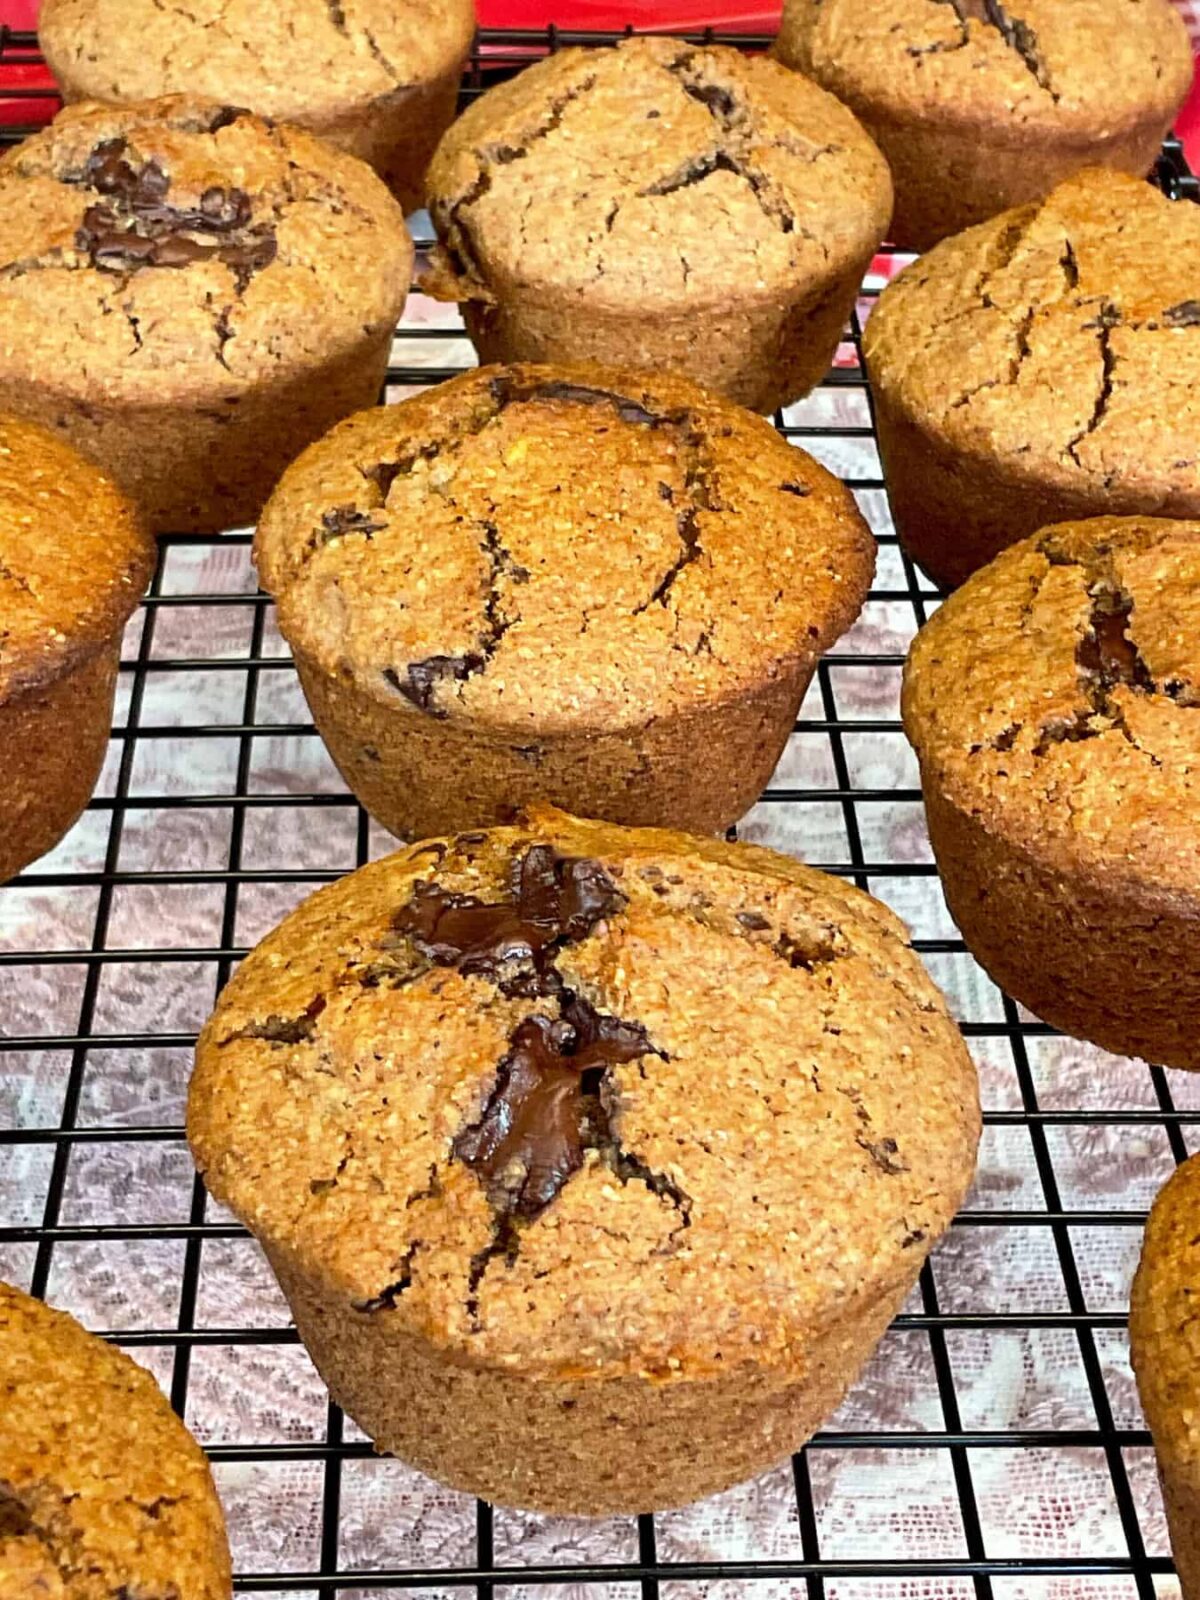 A batch of chocolate chip bran muffins on a wire cooling tray.